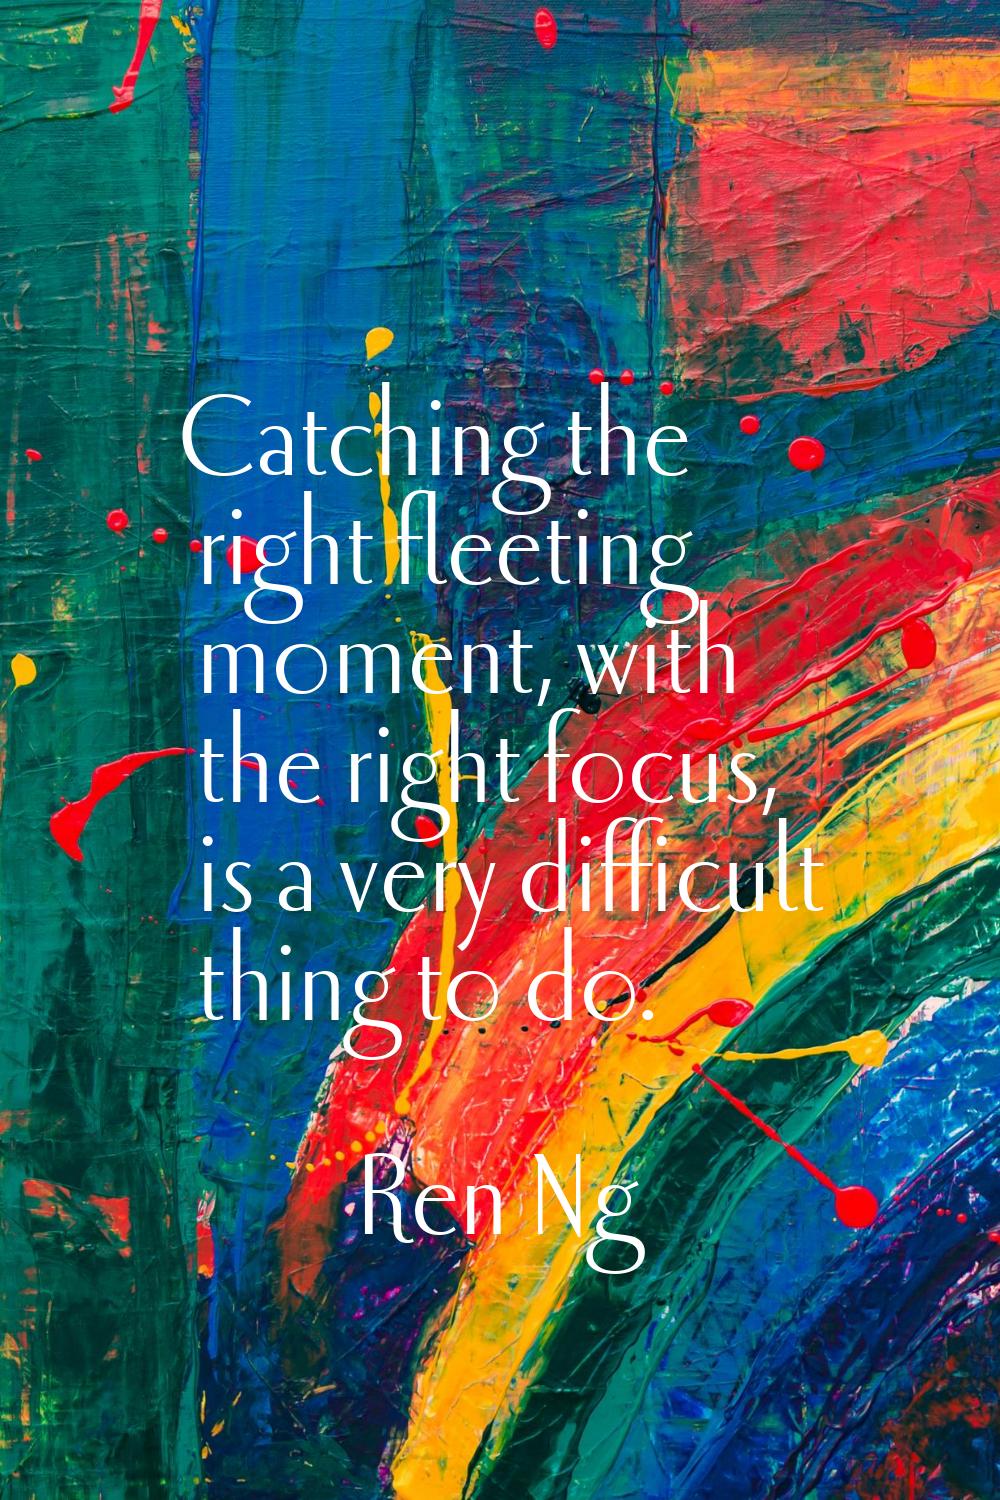 Catching the right fleeting moment, with the right focus, is a very difficult thing to do.